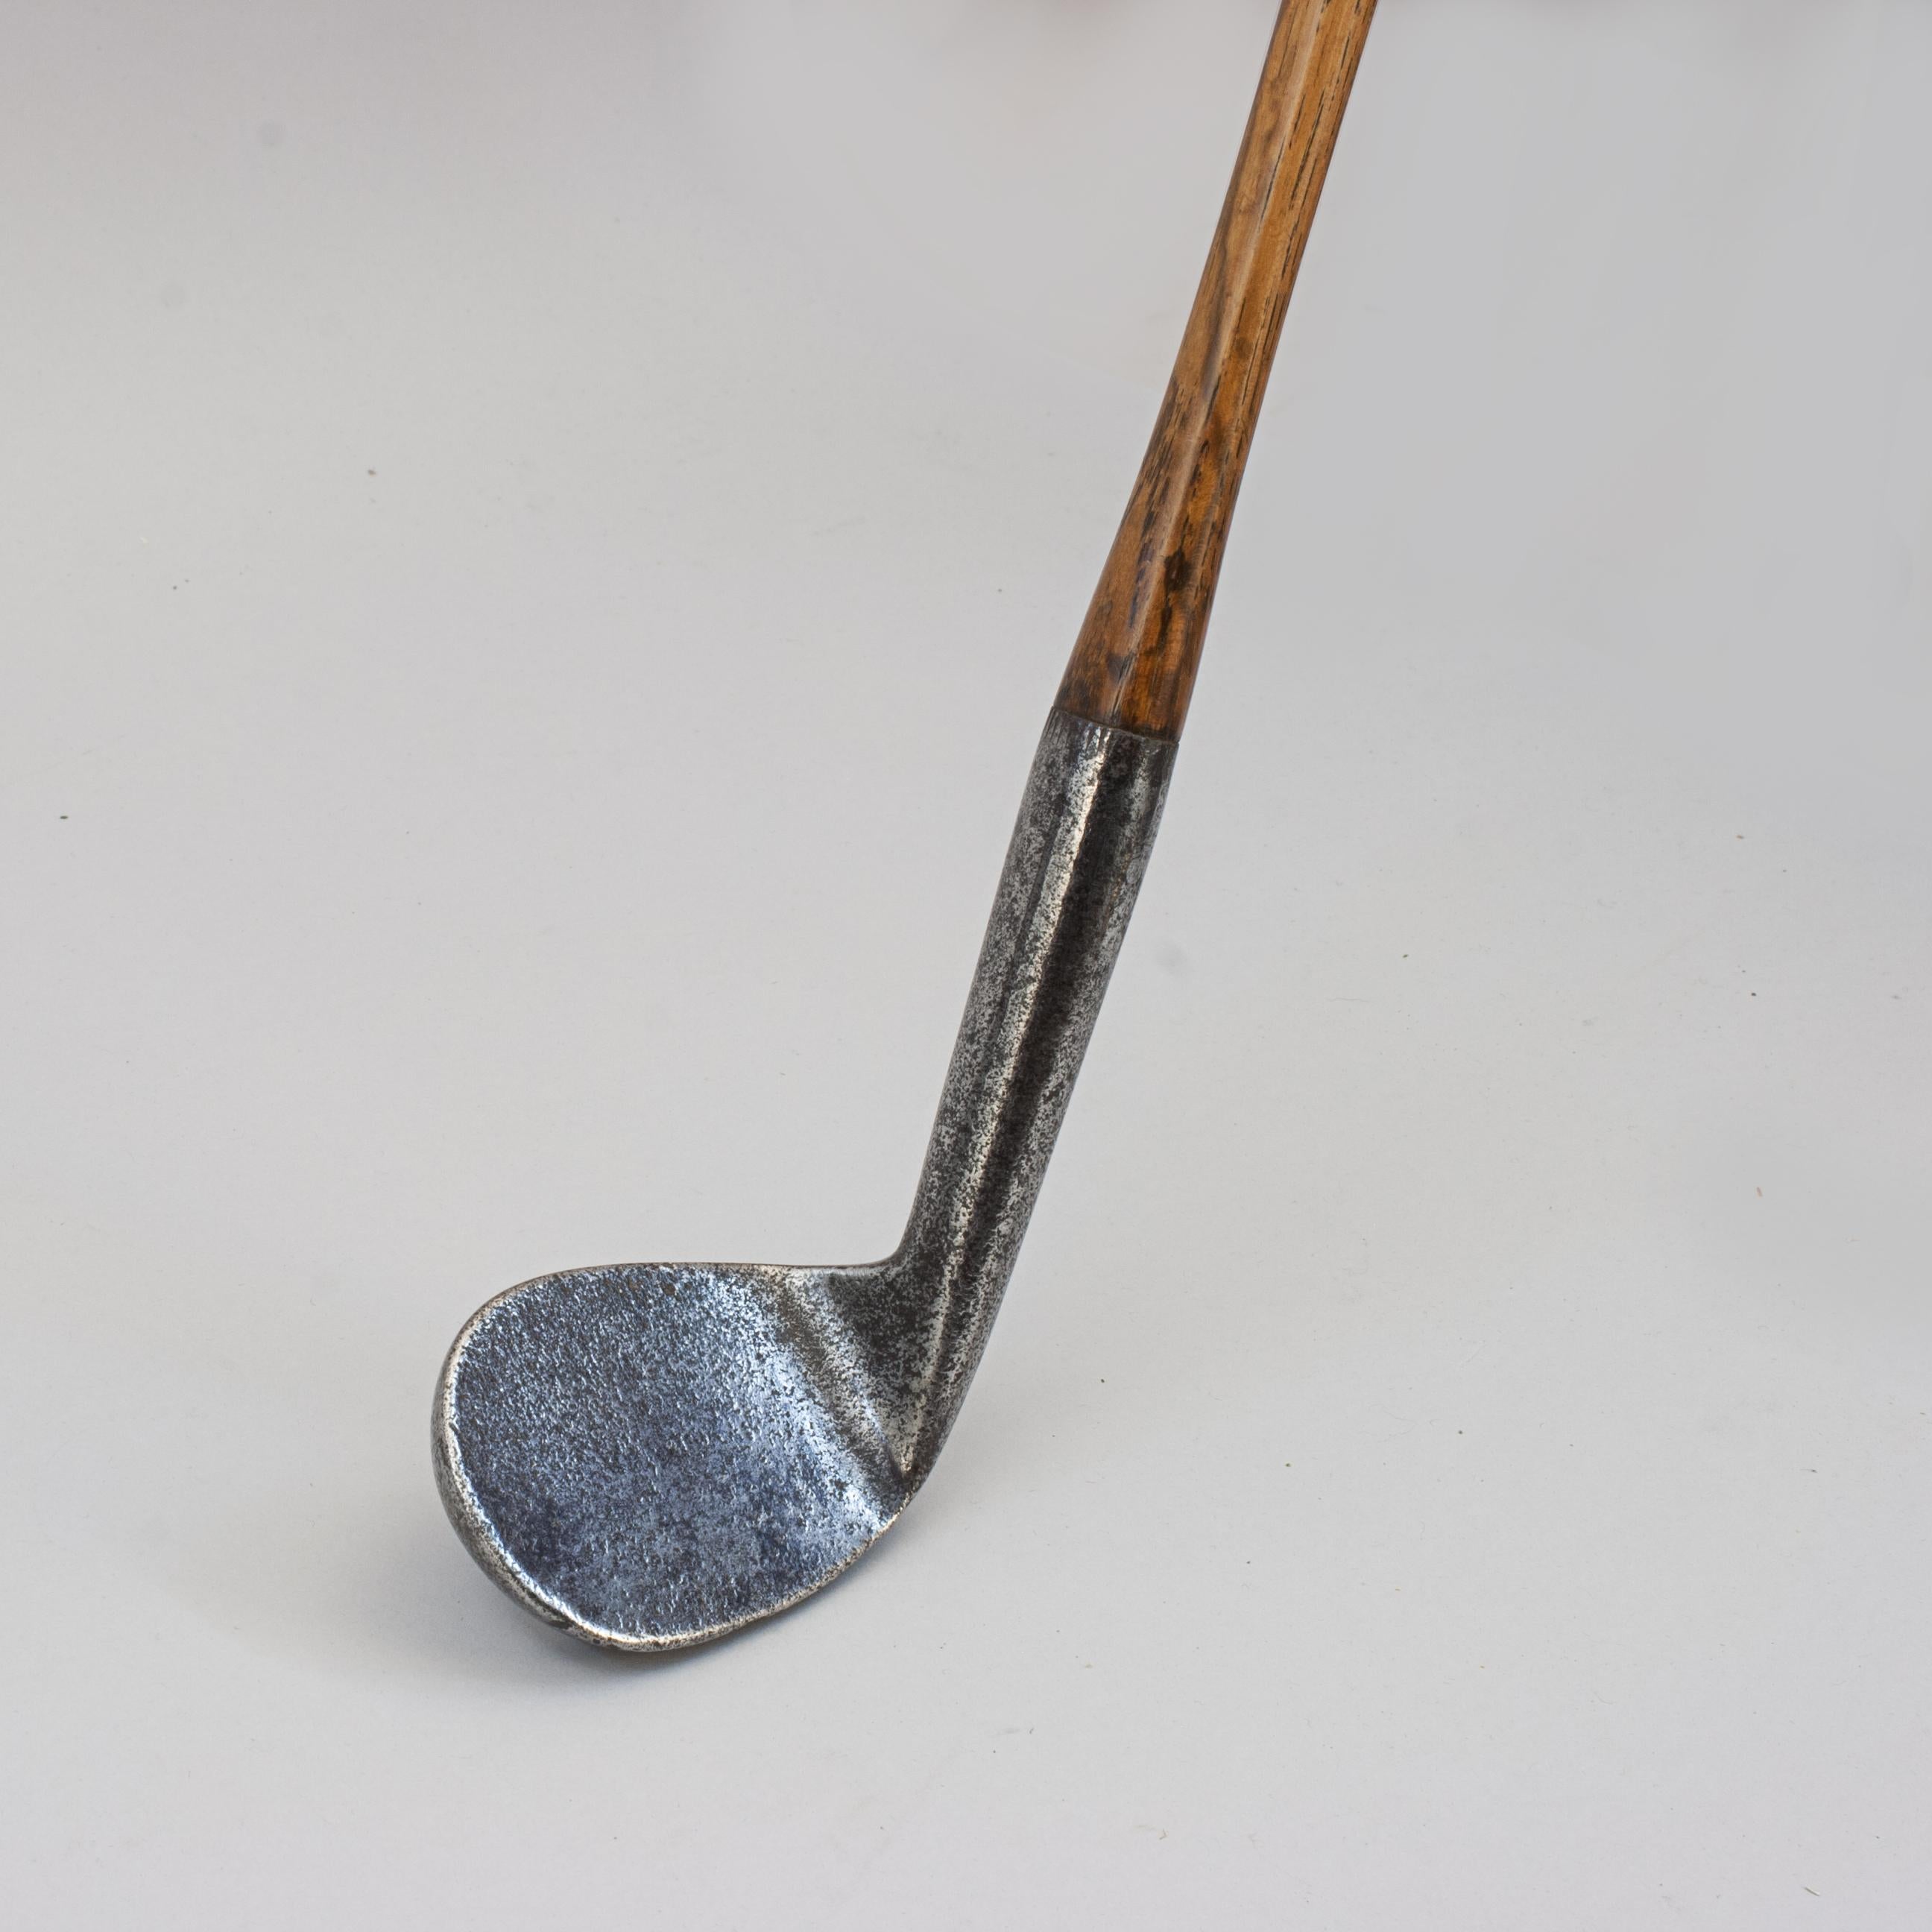 Antique Rut Niblick, Hickory Shafted Golf Club For Sale 3